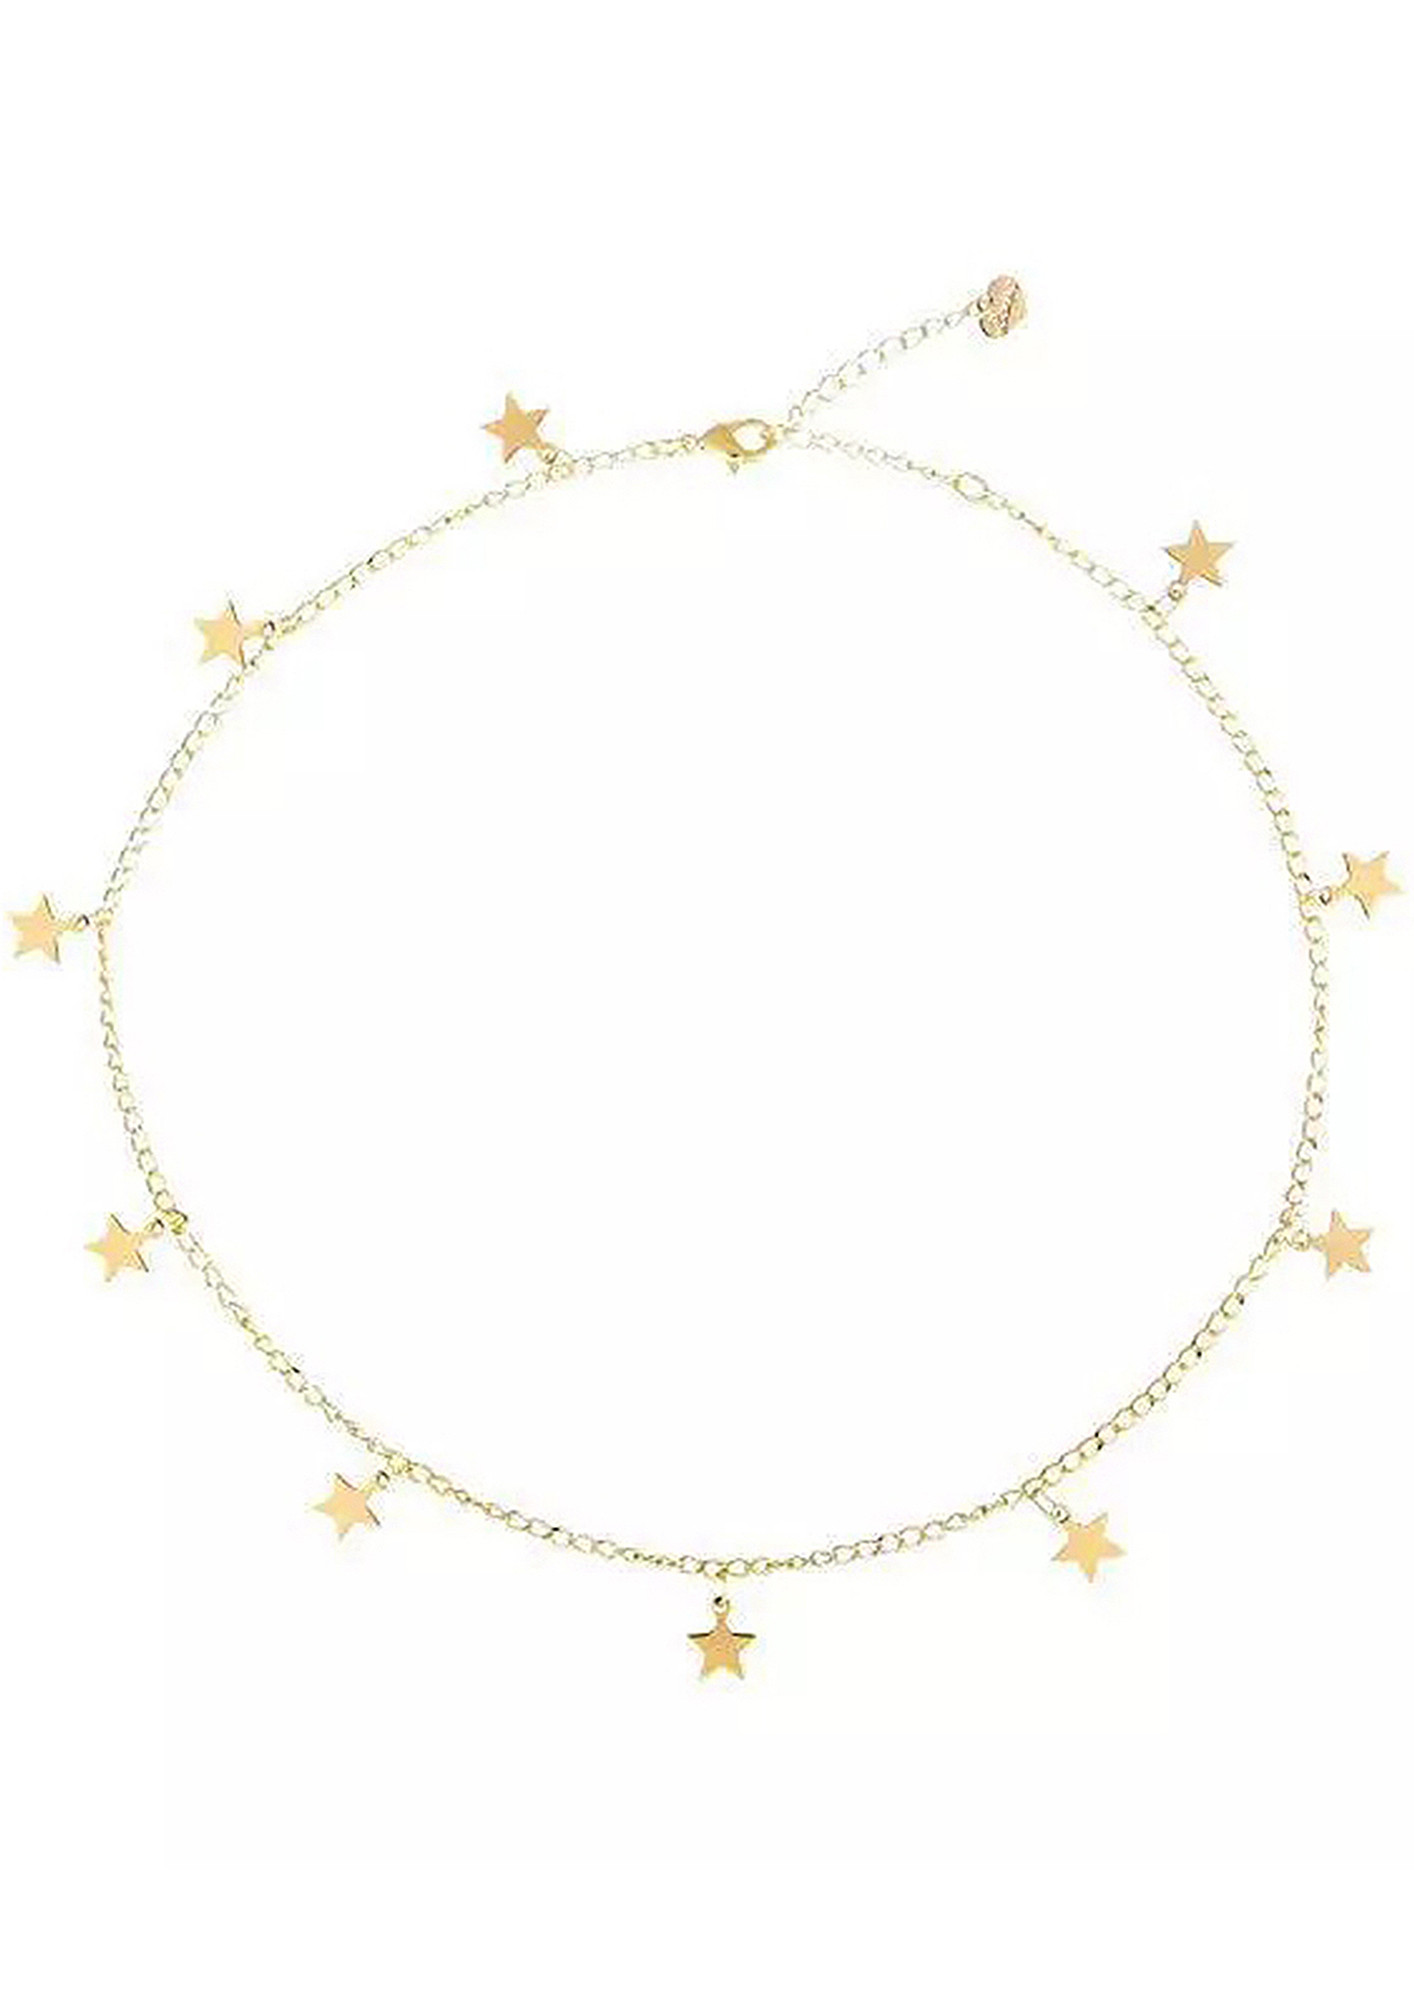 Dainty Star Choker Necklace - The M Jewelers